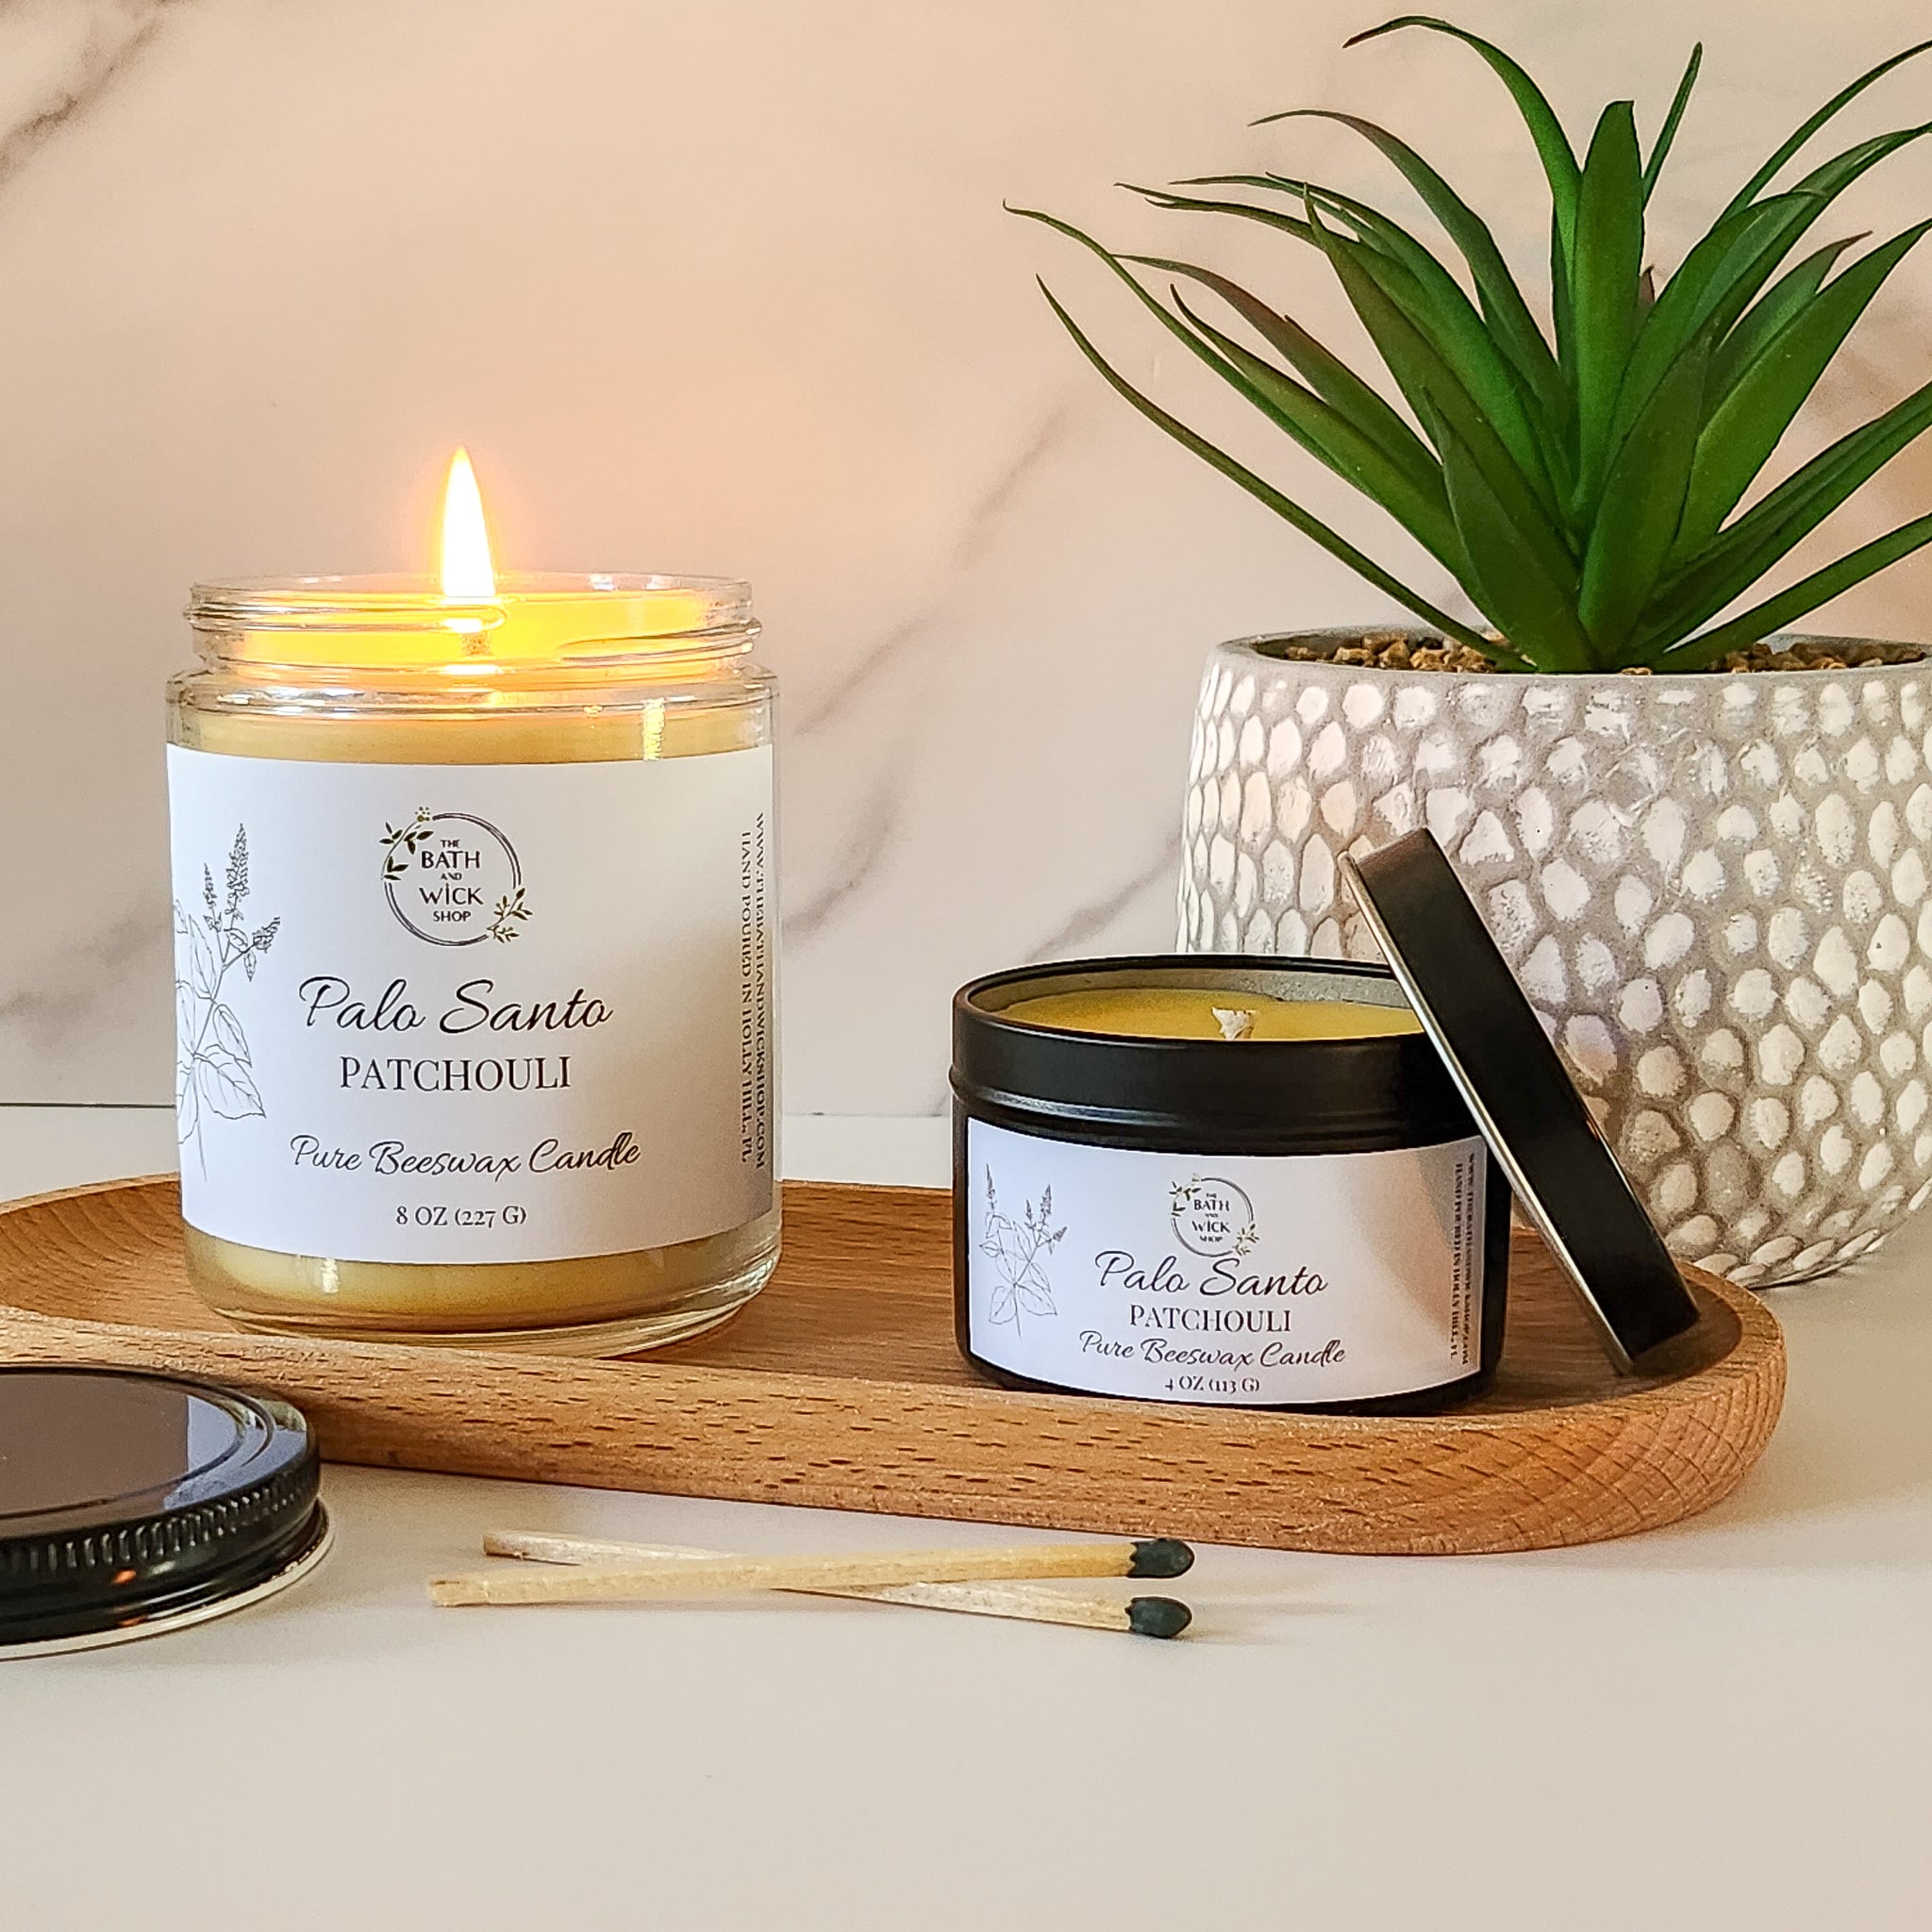 Palo Santo Patchouli Pure Beeswax Candle – The Bath and Wick Shop